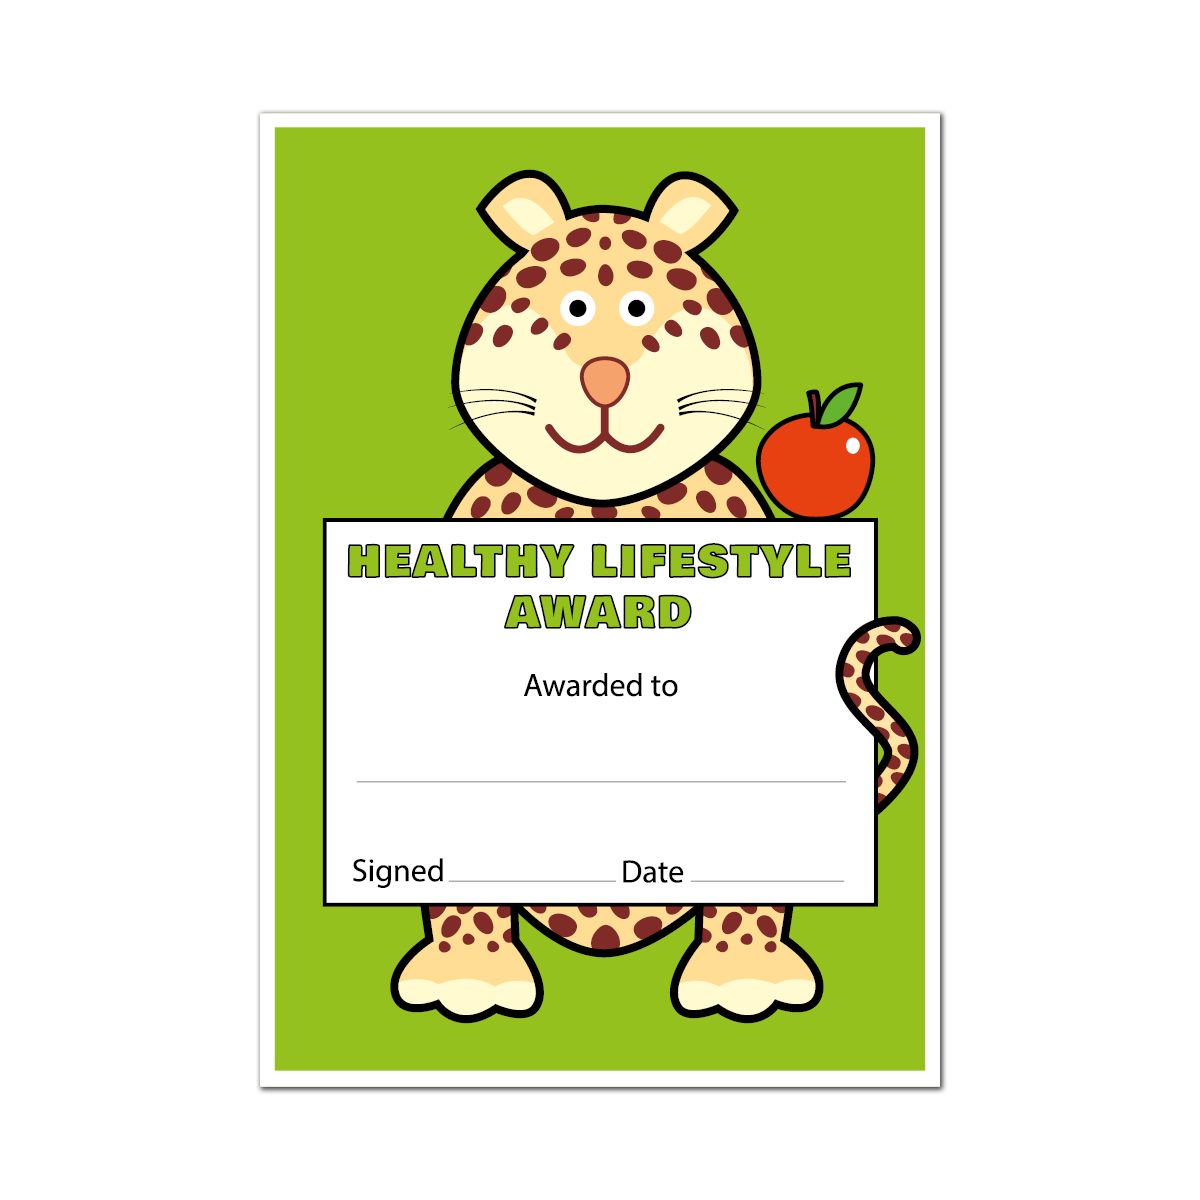 Certificate: Healthy Lifestyle Award